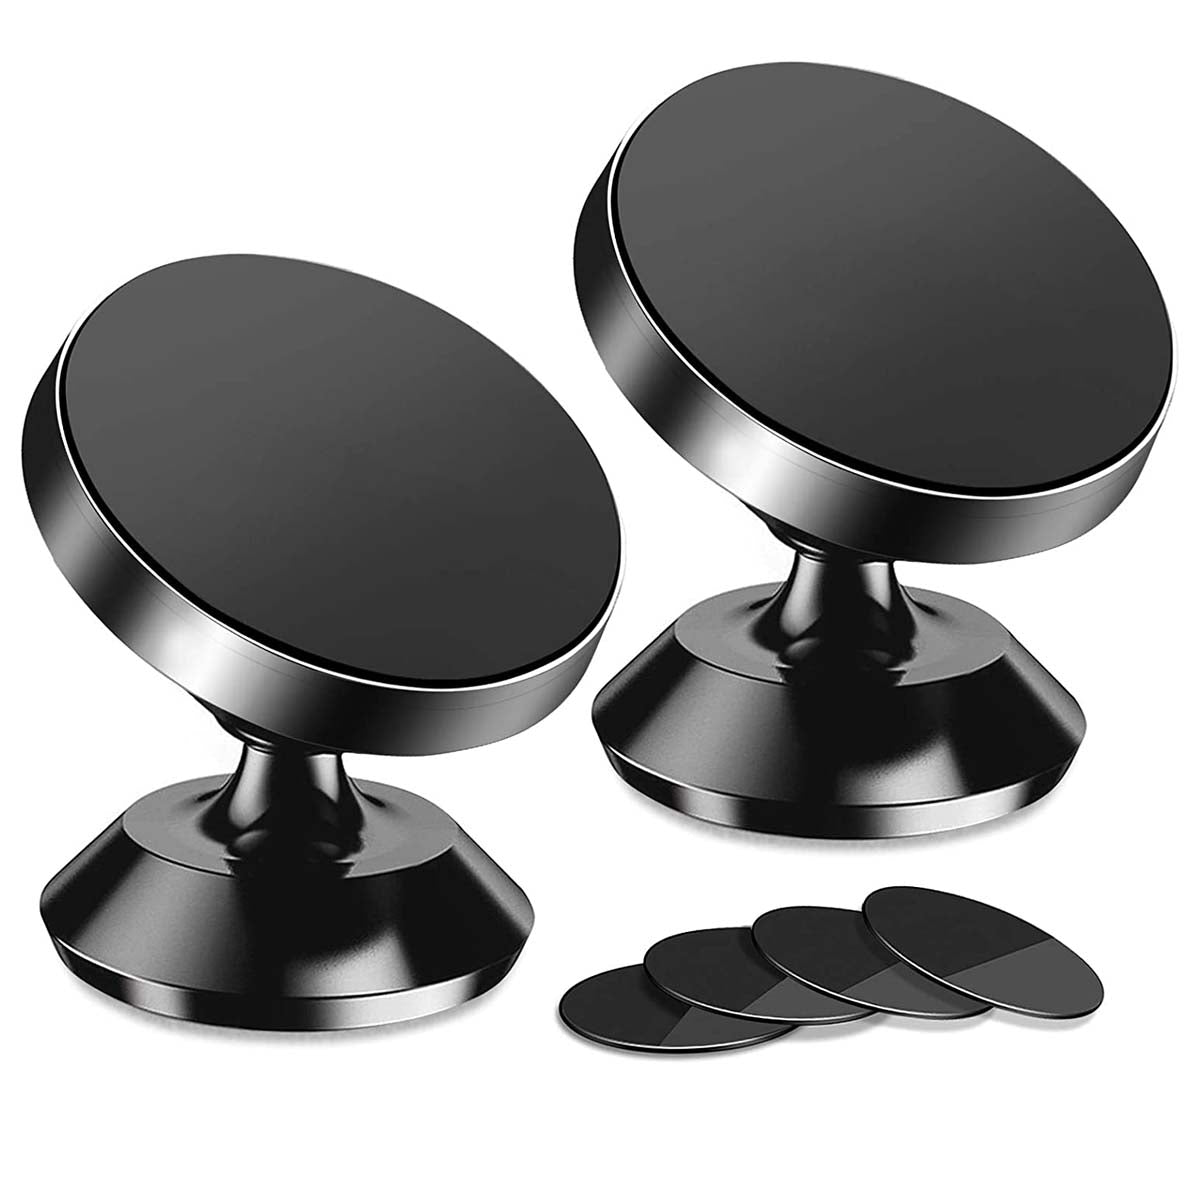 [2 Pack ] Magnetic Phone Mount, Custom For Cars, [ Super Strong Magnet ] [ with 4 Metal Plate ] car Magnetic Phone Holder, [ 360° Rotation ] Universal Dashboard car Mount Fits All Cell Phones, Car Accessories HA13982